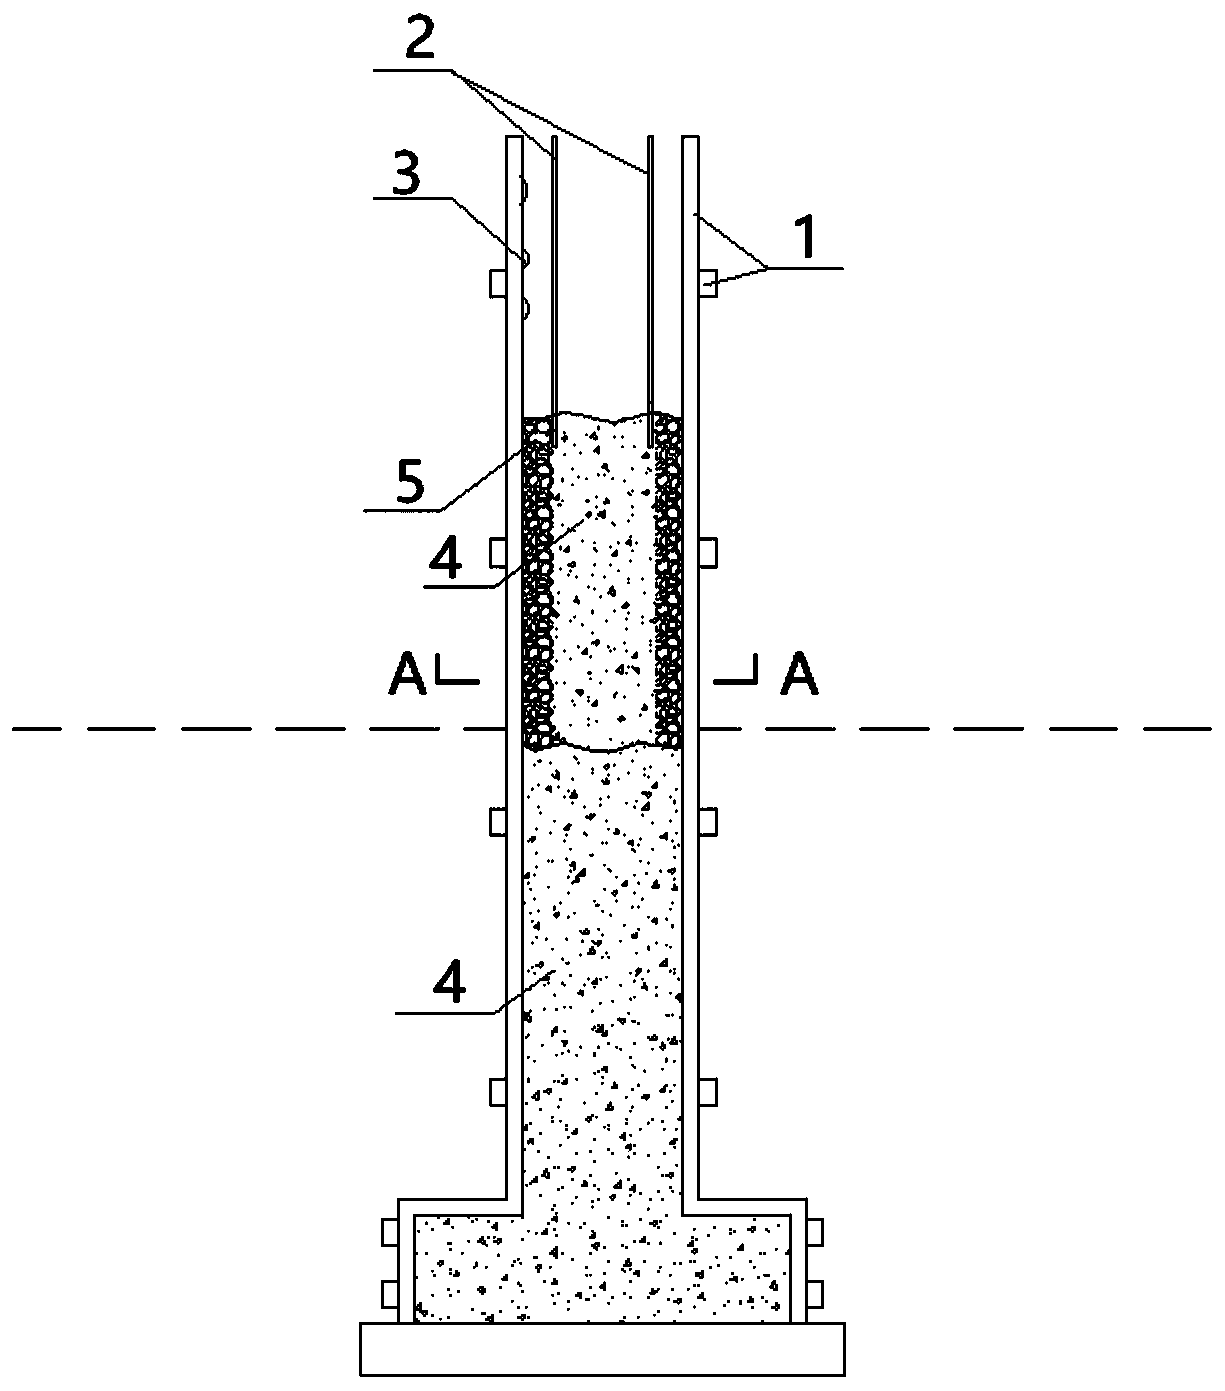 Construction method of vertical face exposed aggregate concrete wall